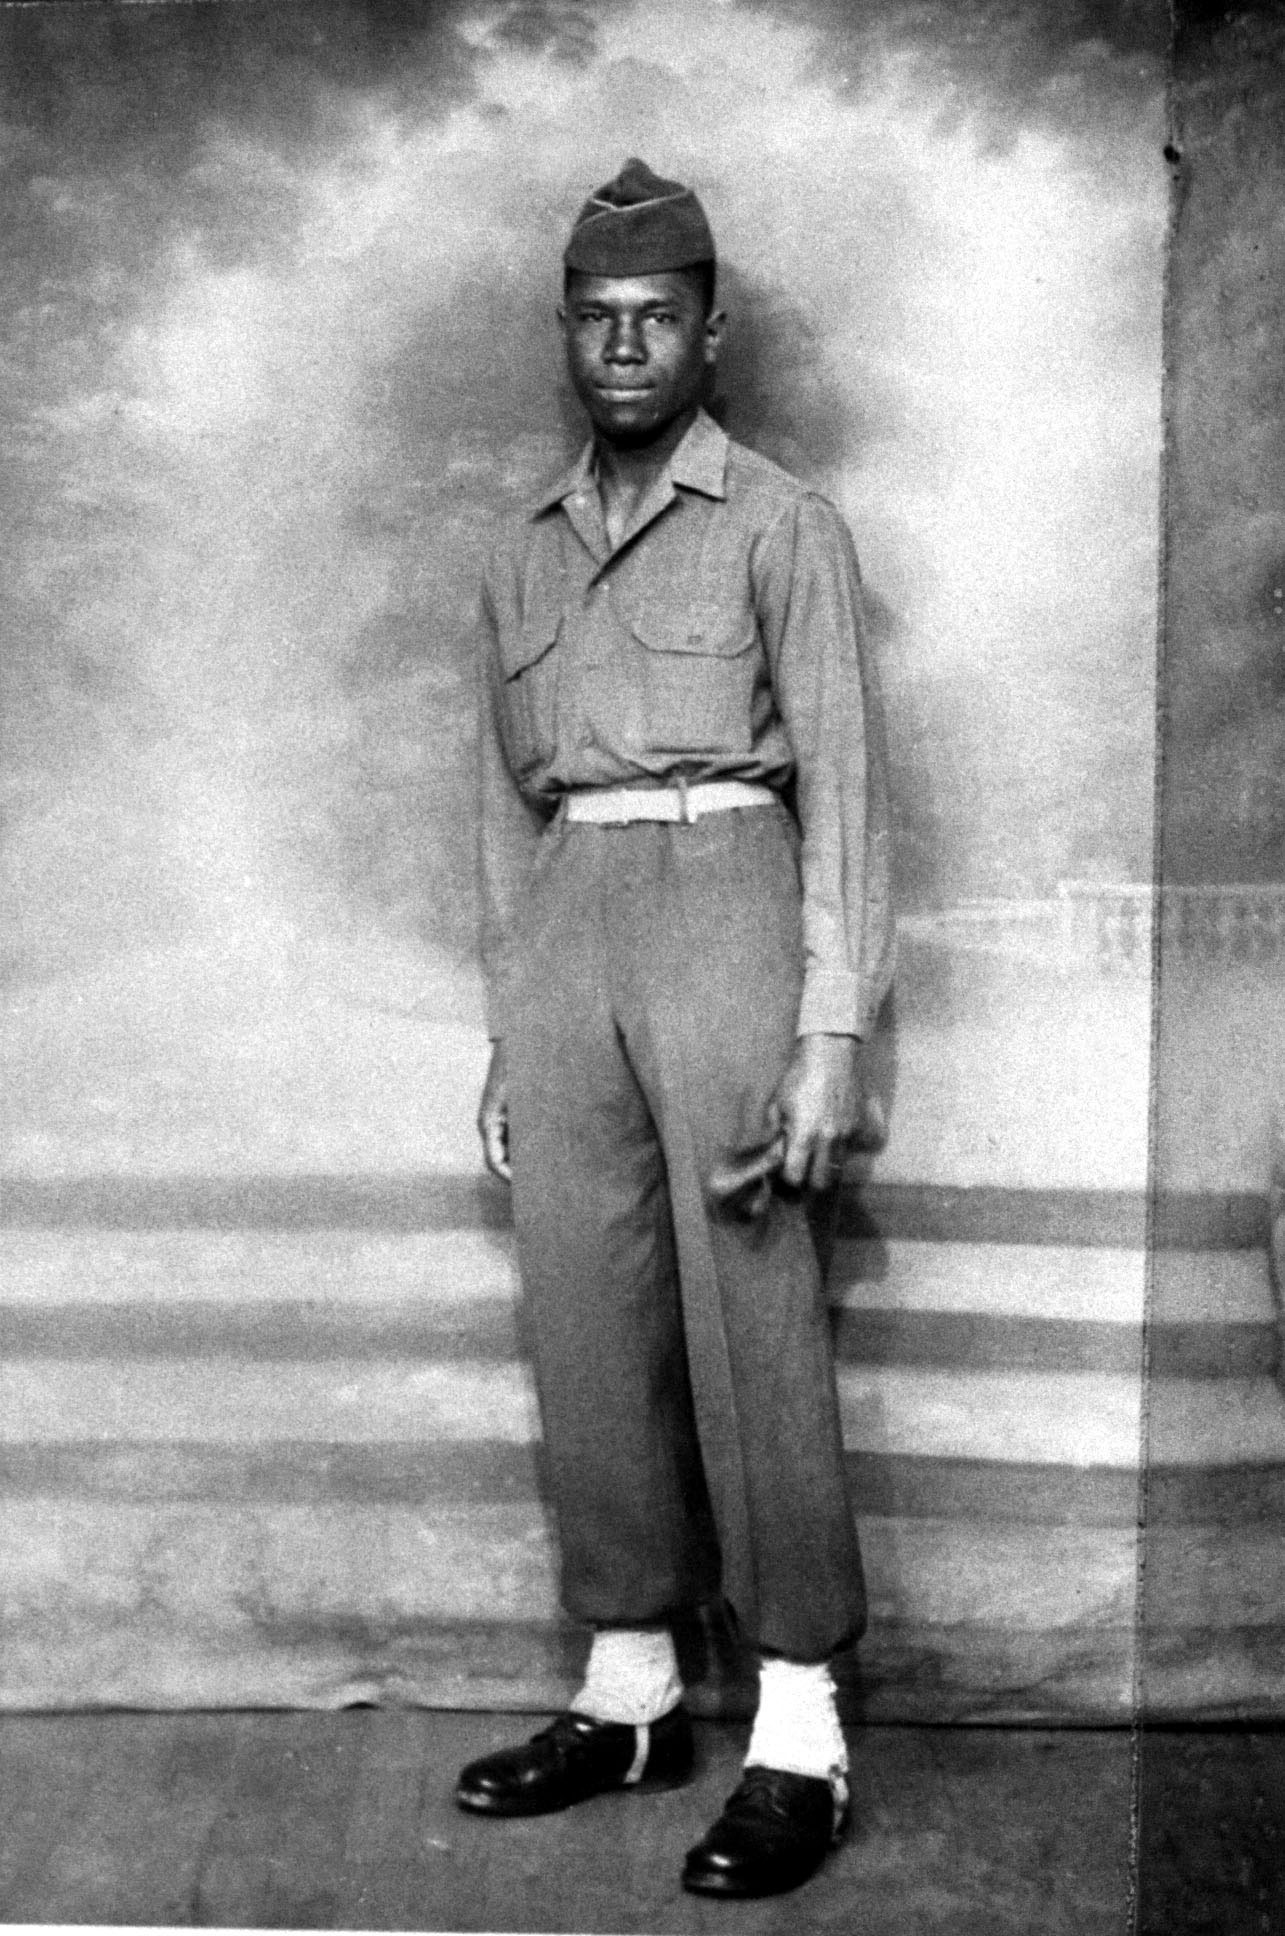 Future civil rights leader Medgar Evers posing in his army uniform in Charbourg, France, in 1945. (John Storey—Getty Images)